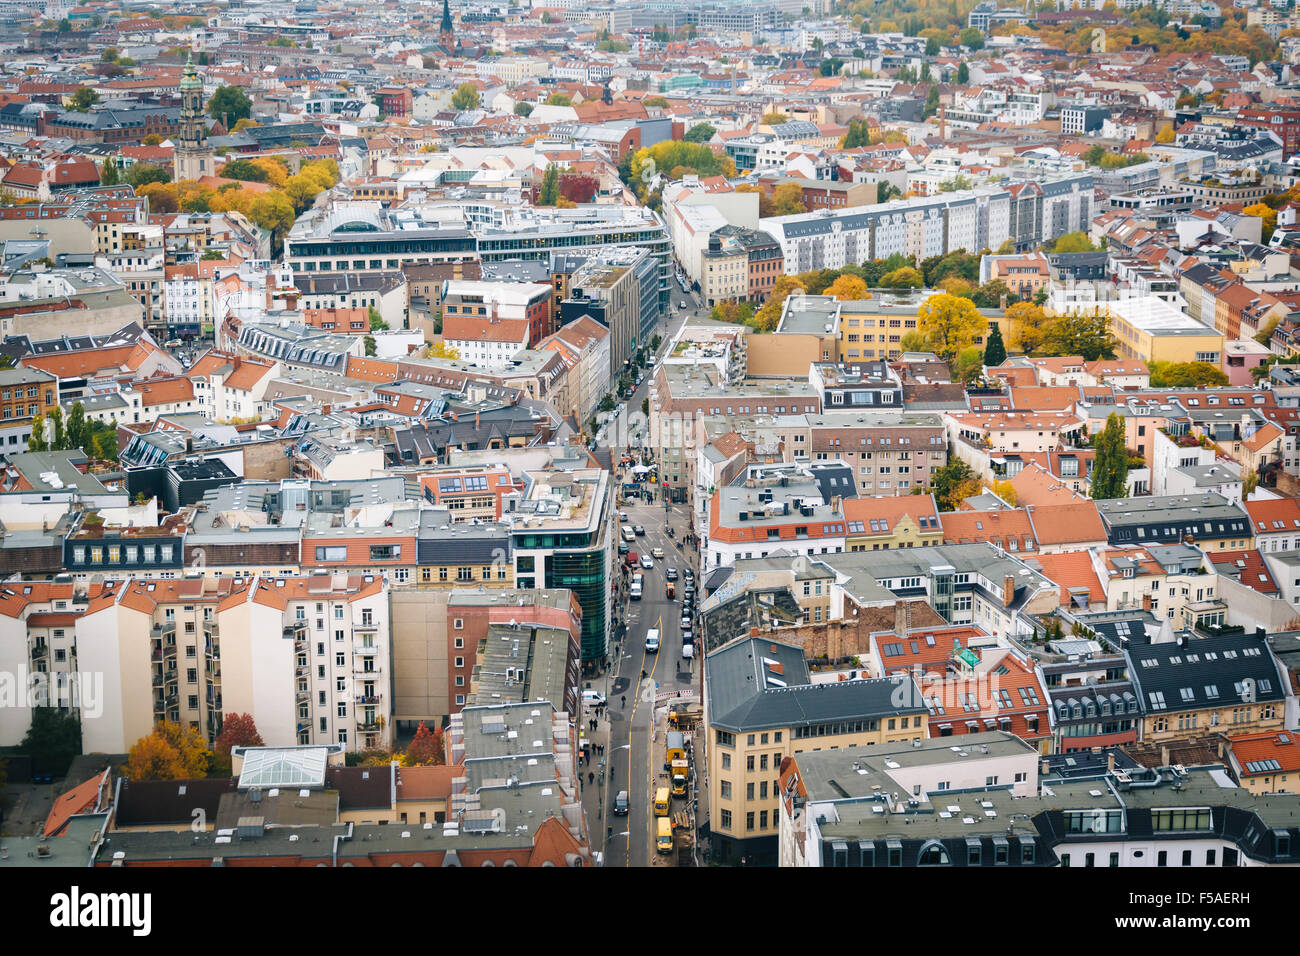 Aerial view of buildings and streets in Berlin, Germany. Stock Photo